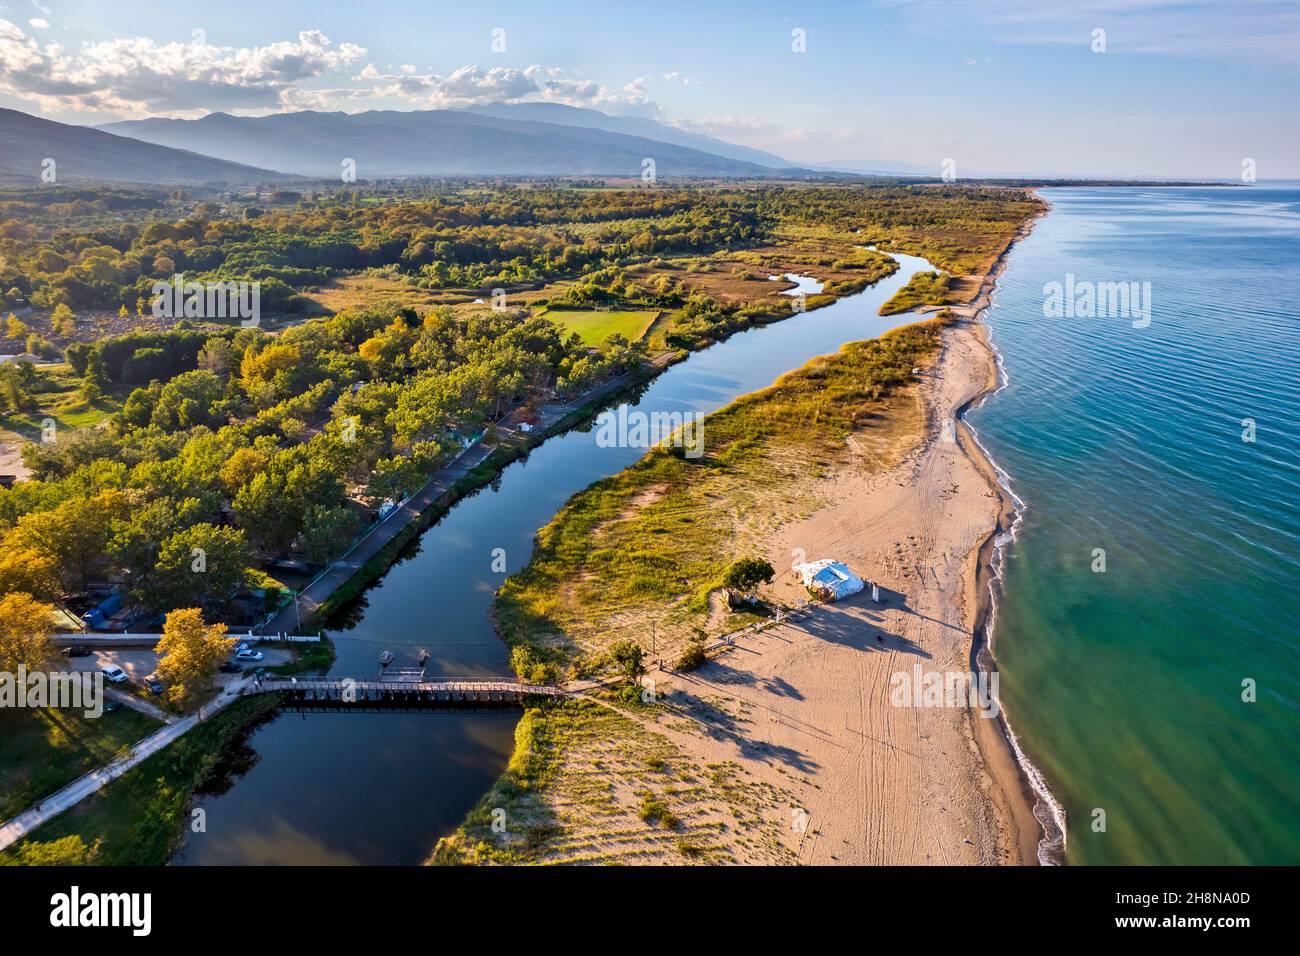 The beach of Stomio village and the southern 'edge' of the Delta of Pineios river at the Aegean Sea. Larissa, Thessaly, Greece. Stock Photo